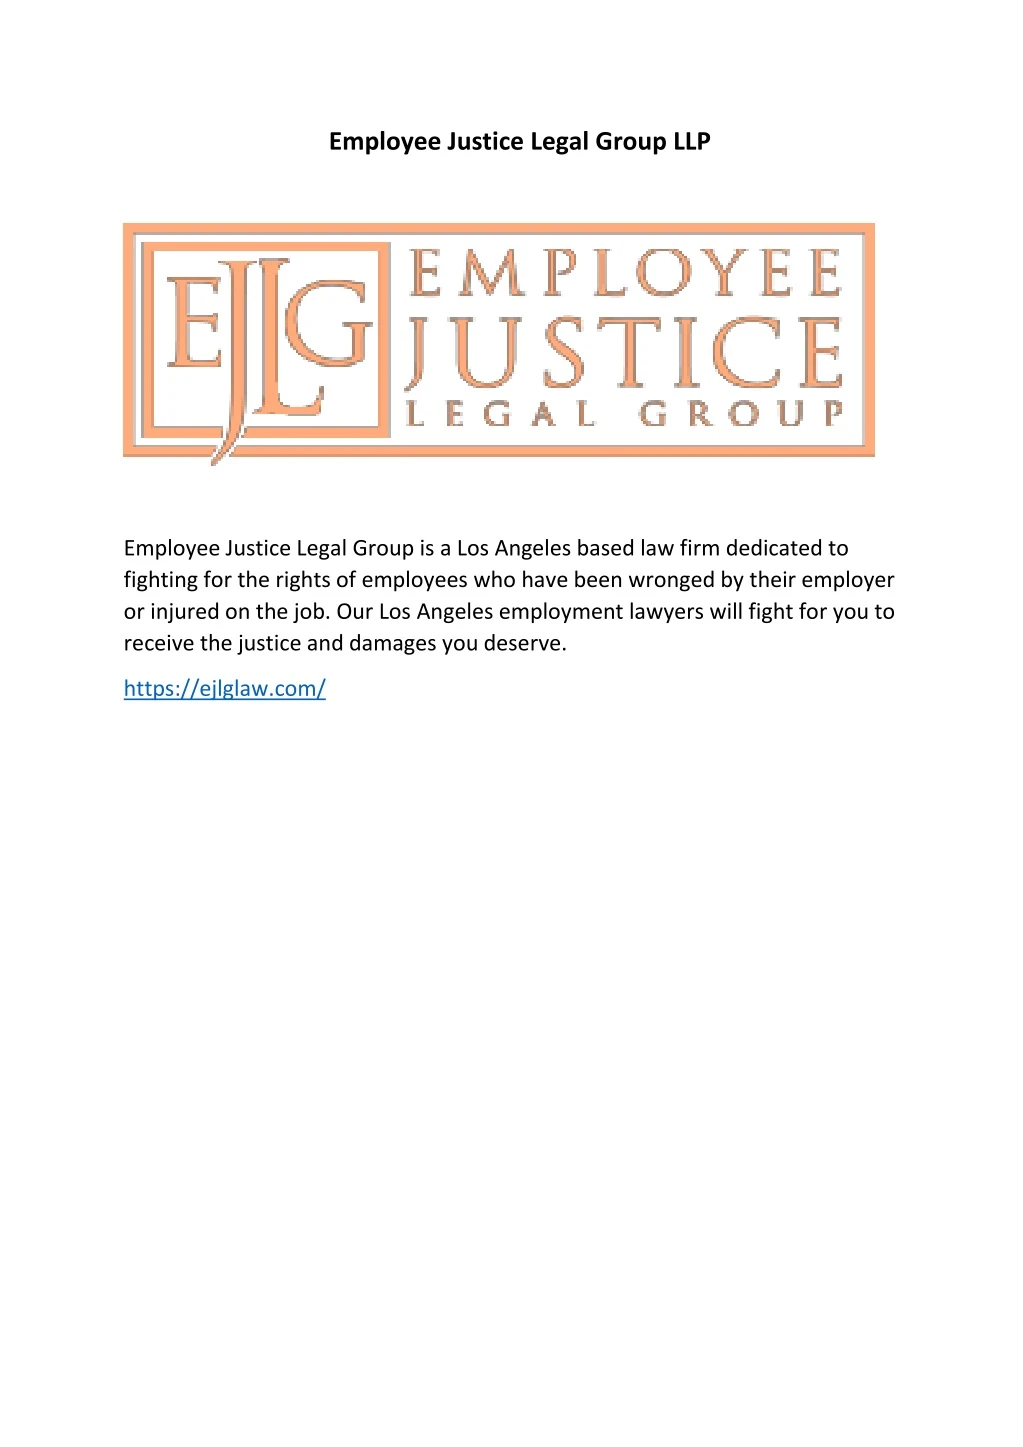 employee justice legal group llp